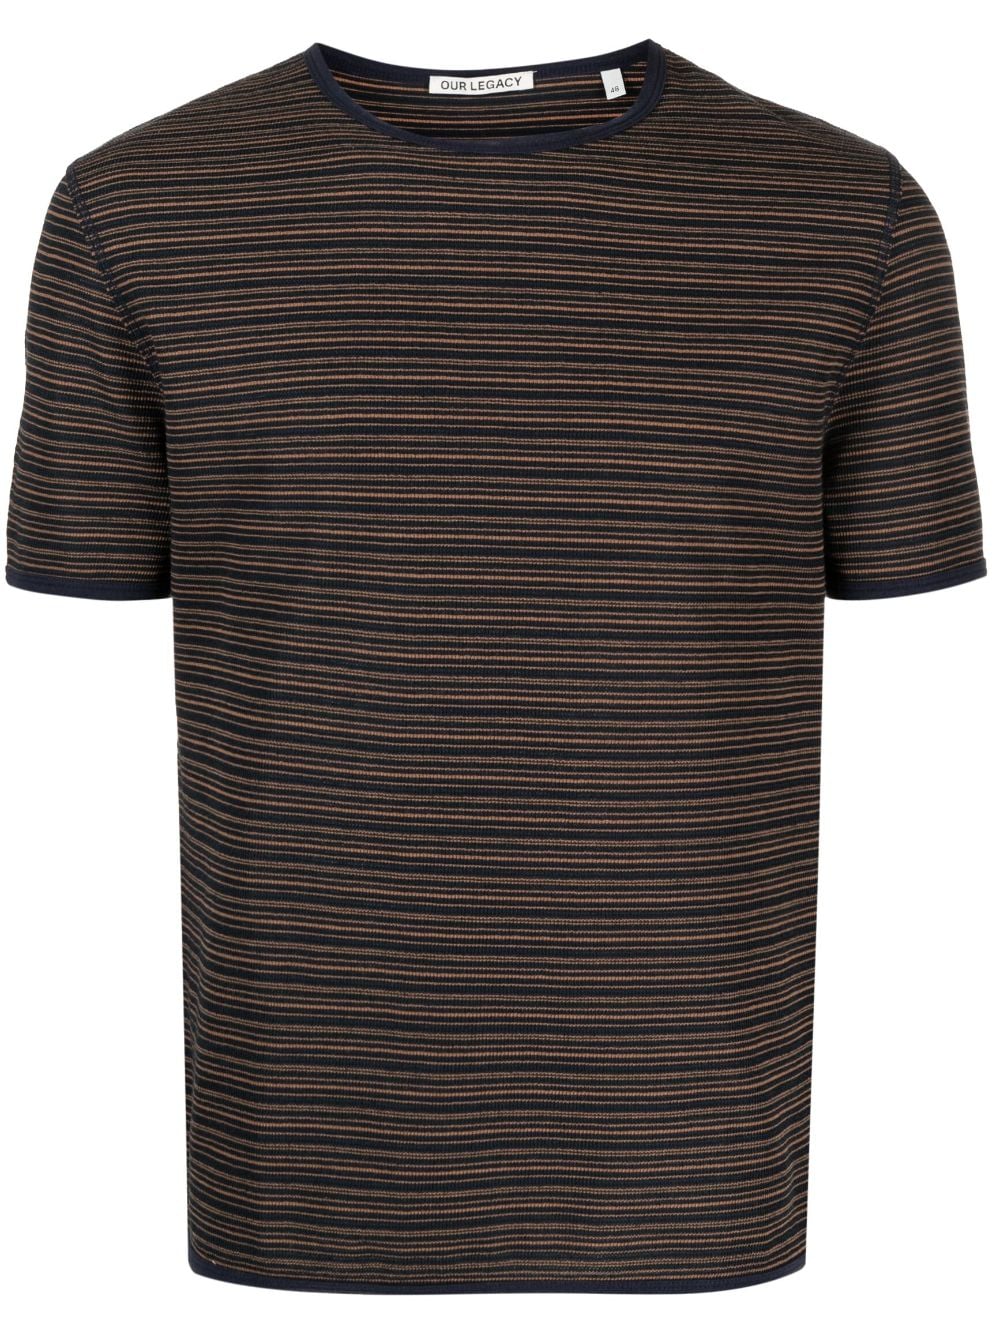 OUR LEGACY STRIPED SHORT-SLEEVE T-SHIRT